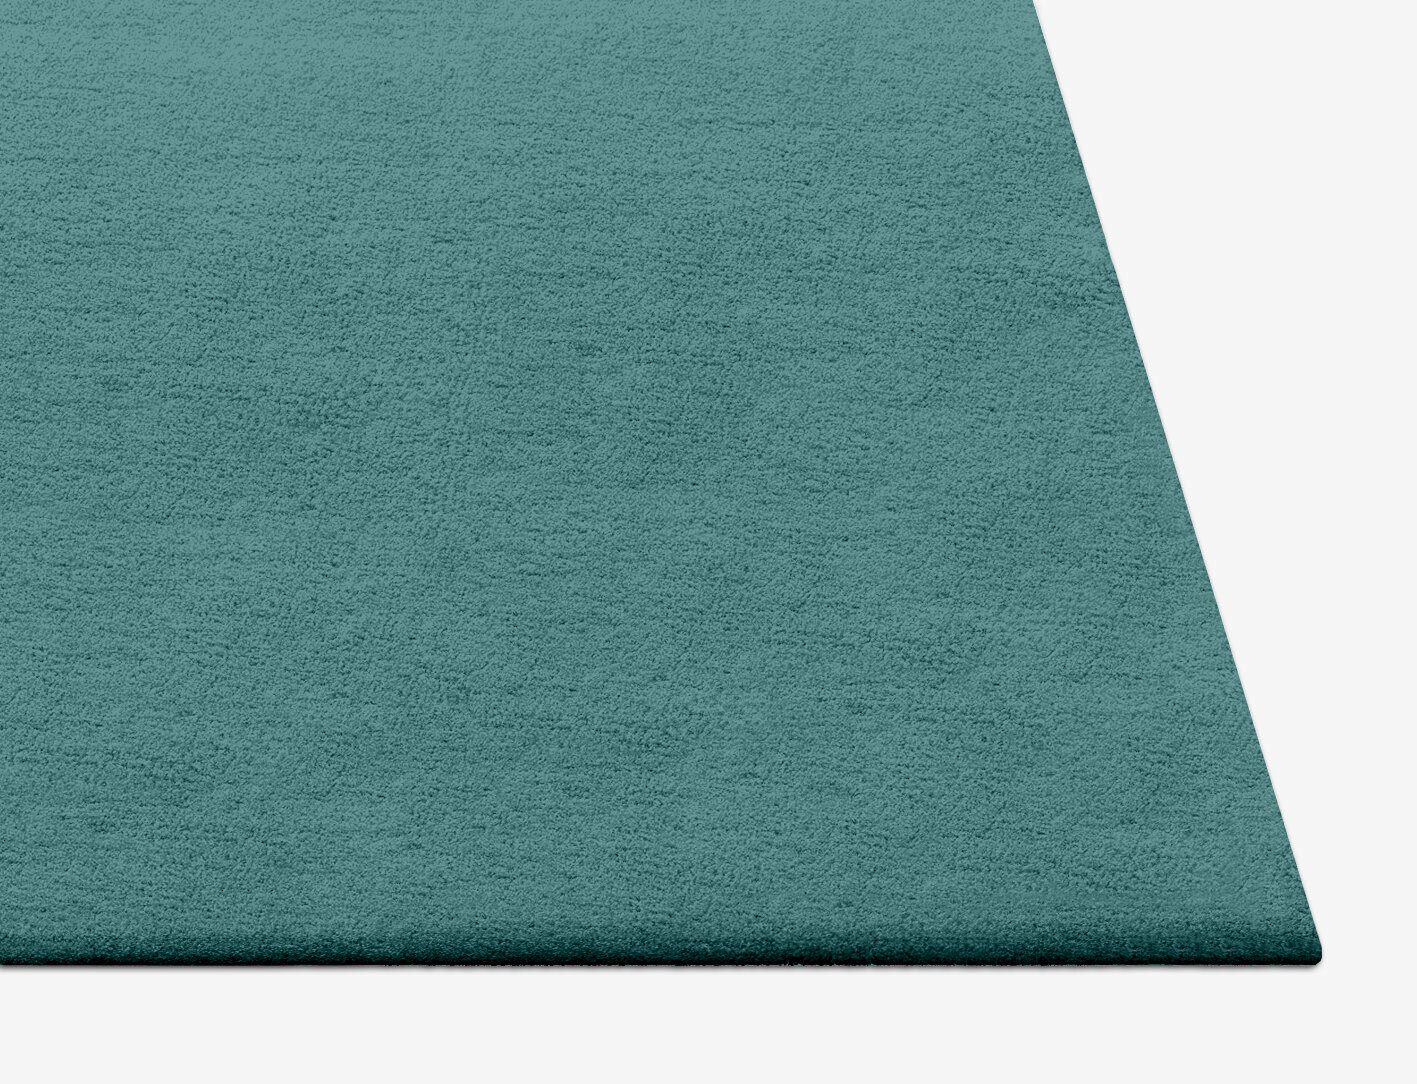 RA-CG08 Solid Colors Square Hand Tufted Pure Wool Custom Rug by Rug Artisan